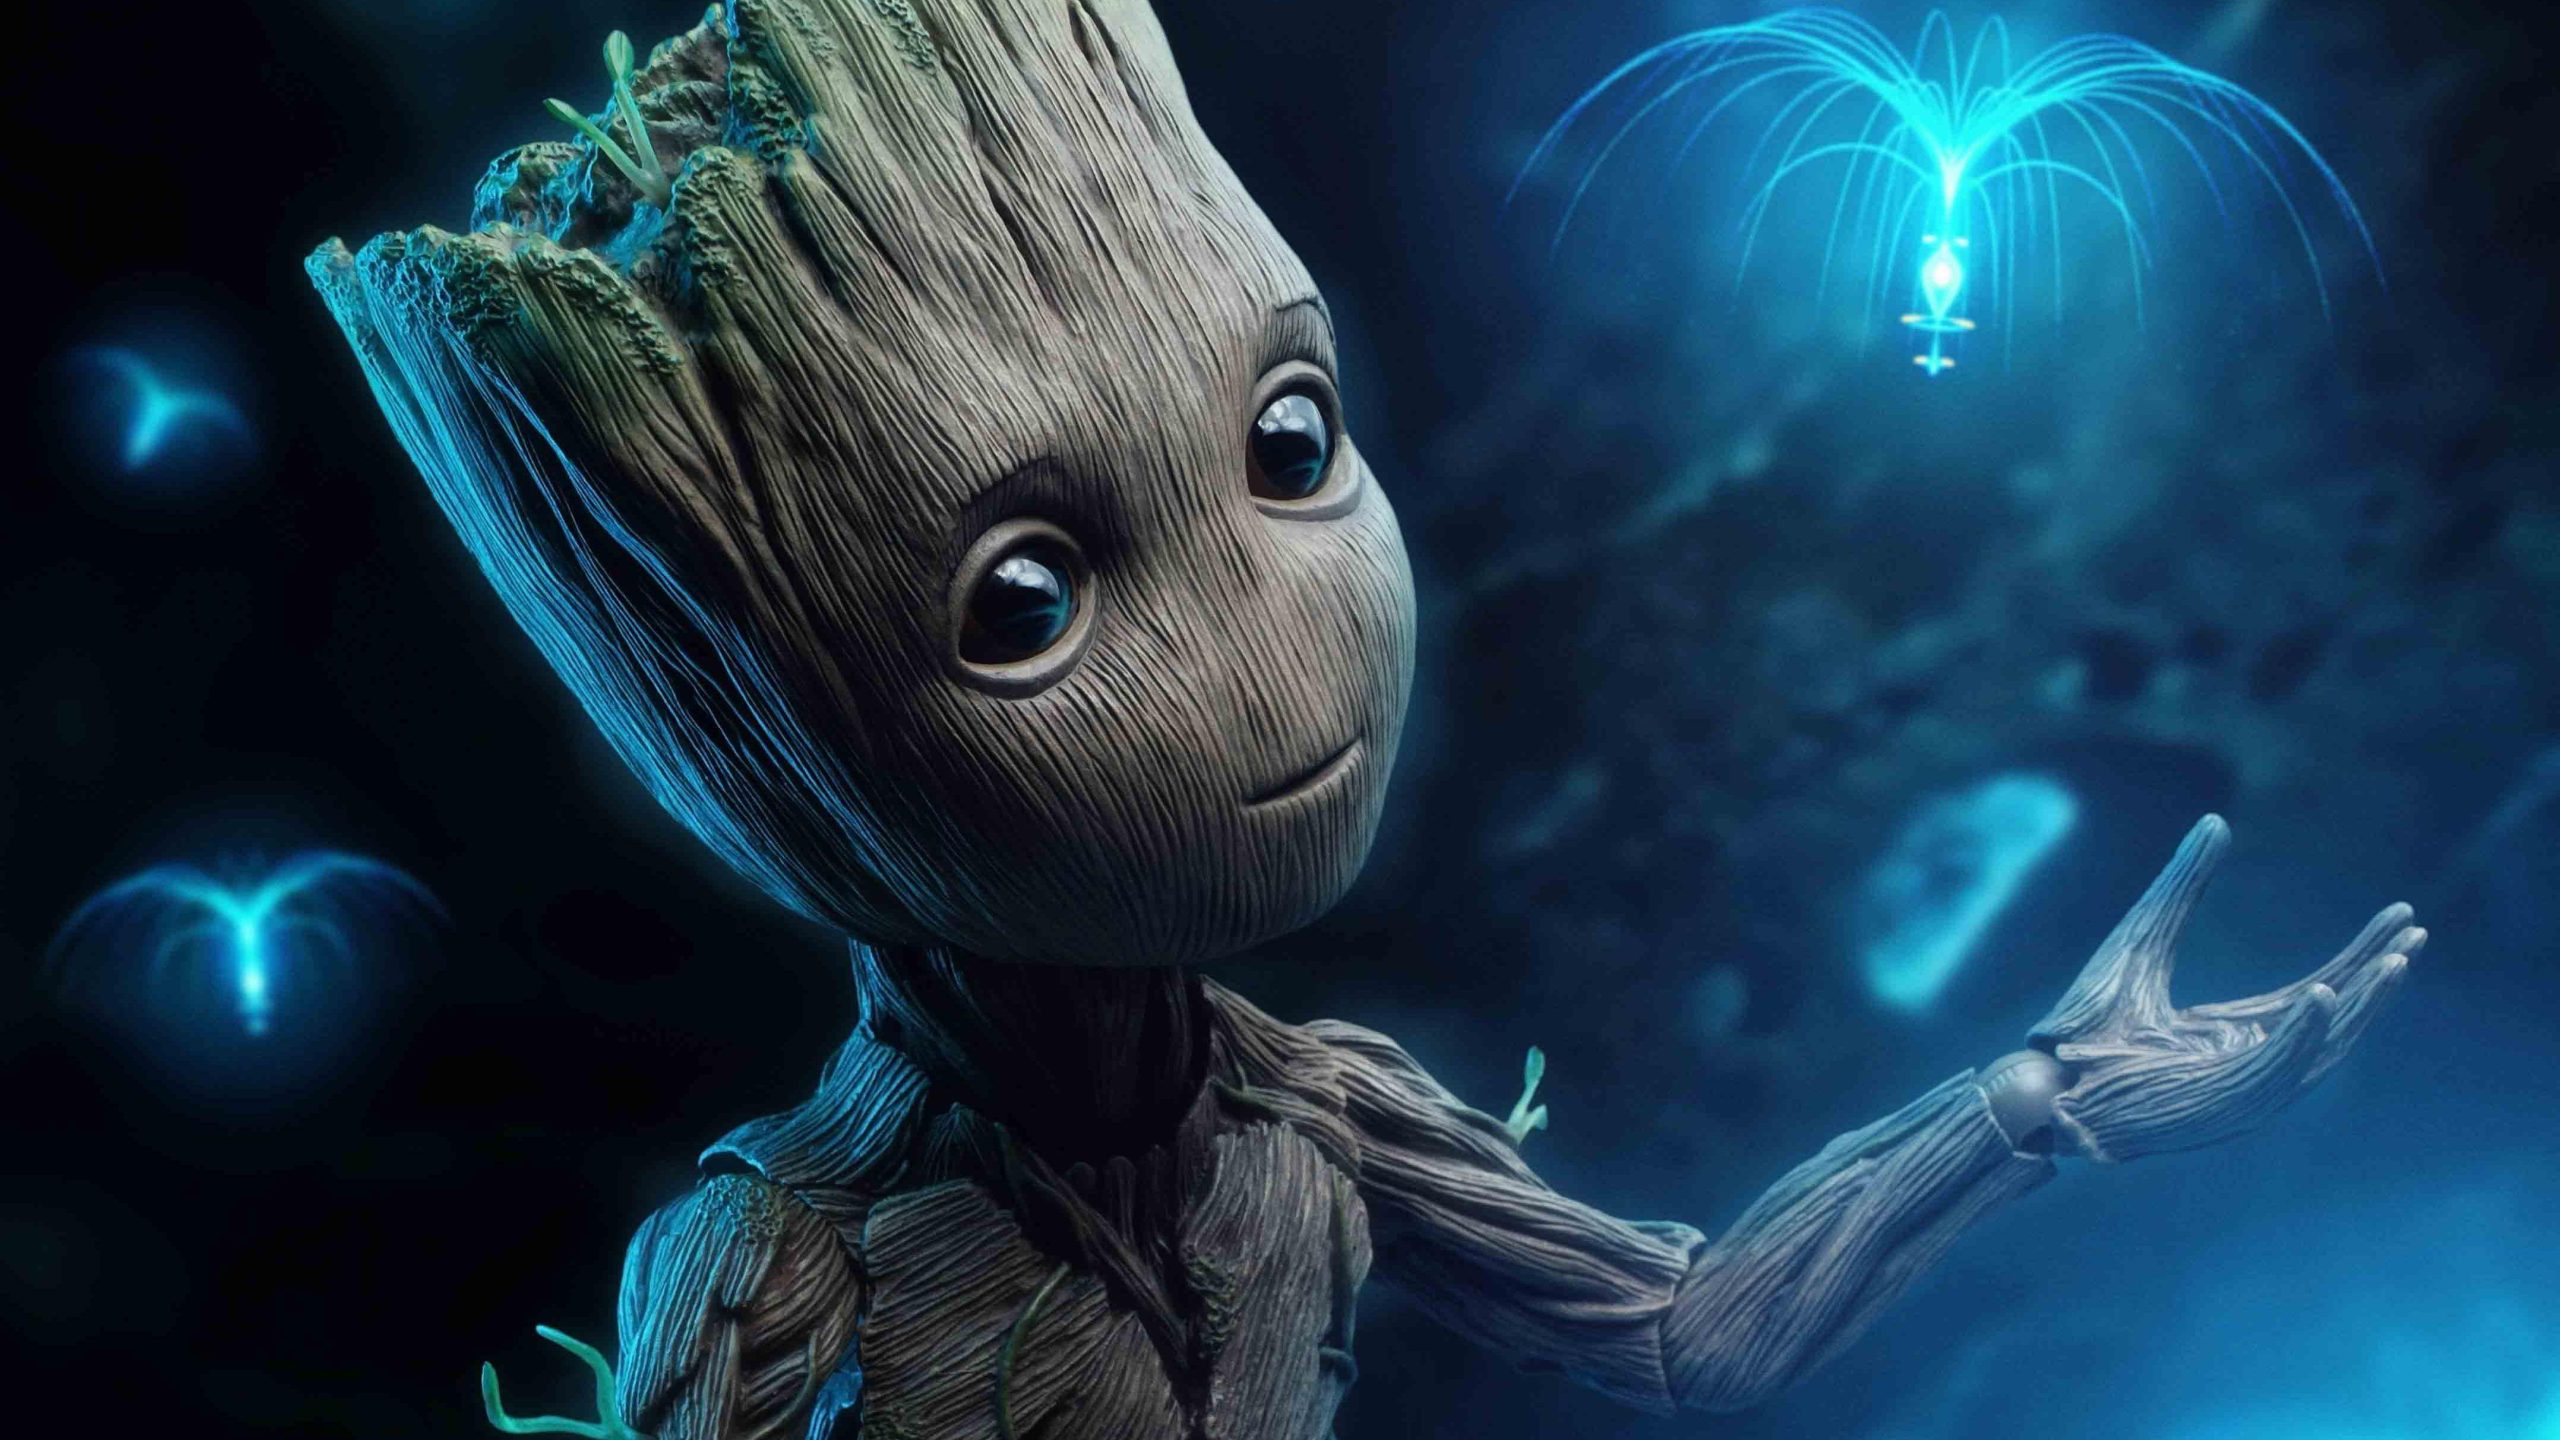 Cute Baby Groot Guardians Of The Galaxy Pc Wallpaper, Cute Baby Groot Guardians Of The Galaxy, Movies